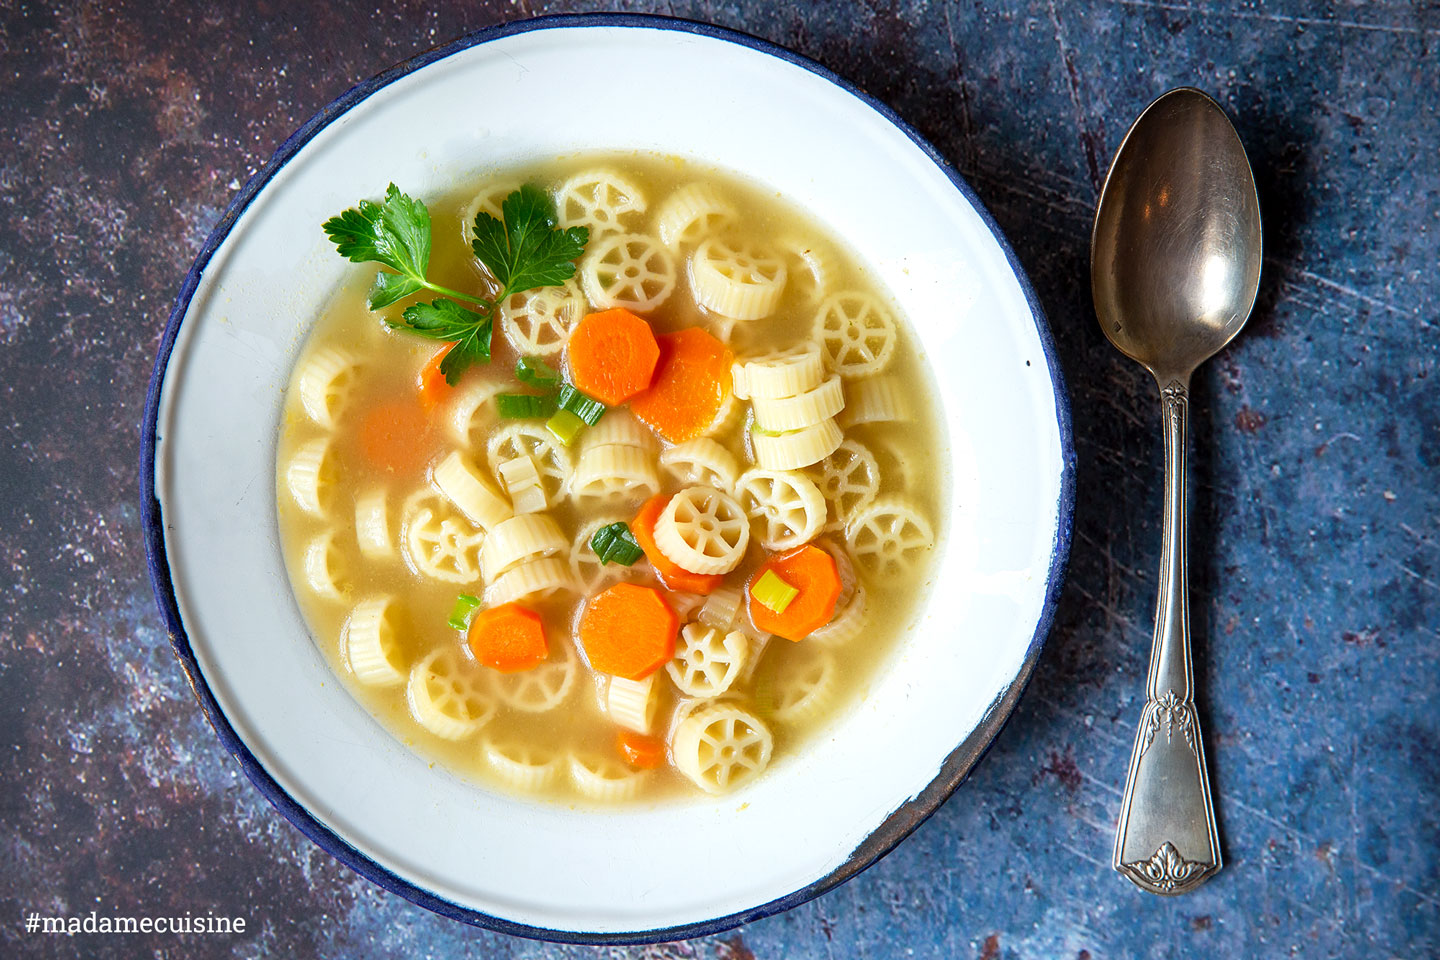 Noodle soup with home-cooked vegetable broth